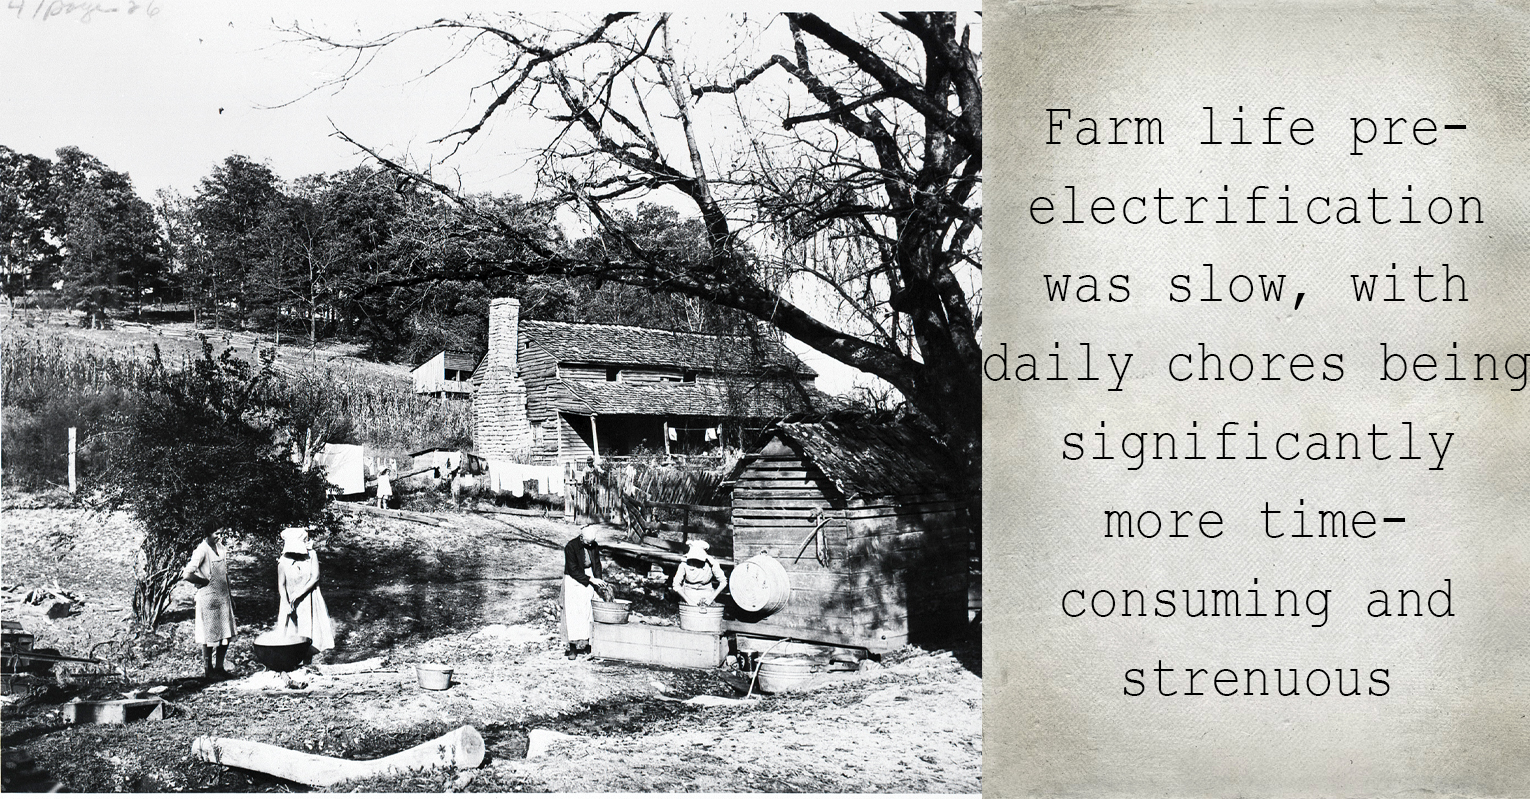 Farm life pre-electrification was slow, with daily chores being significantly more time-consuming and strenuous